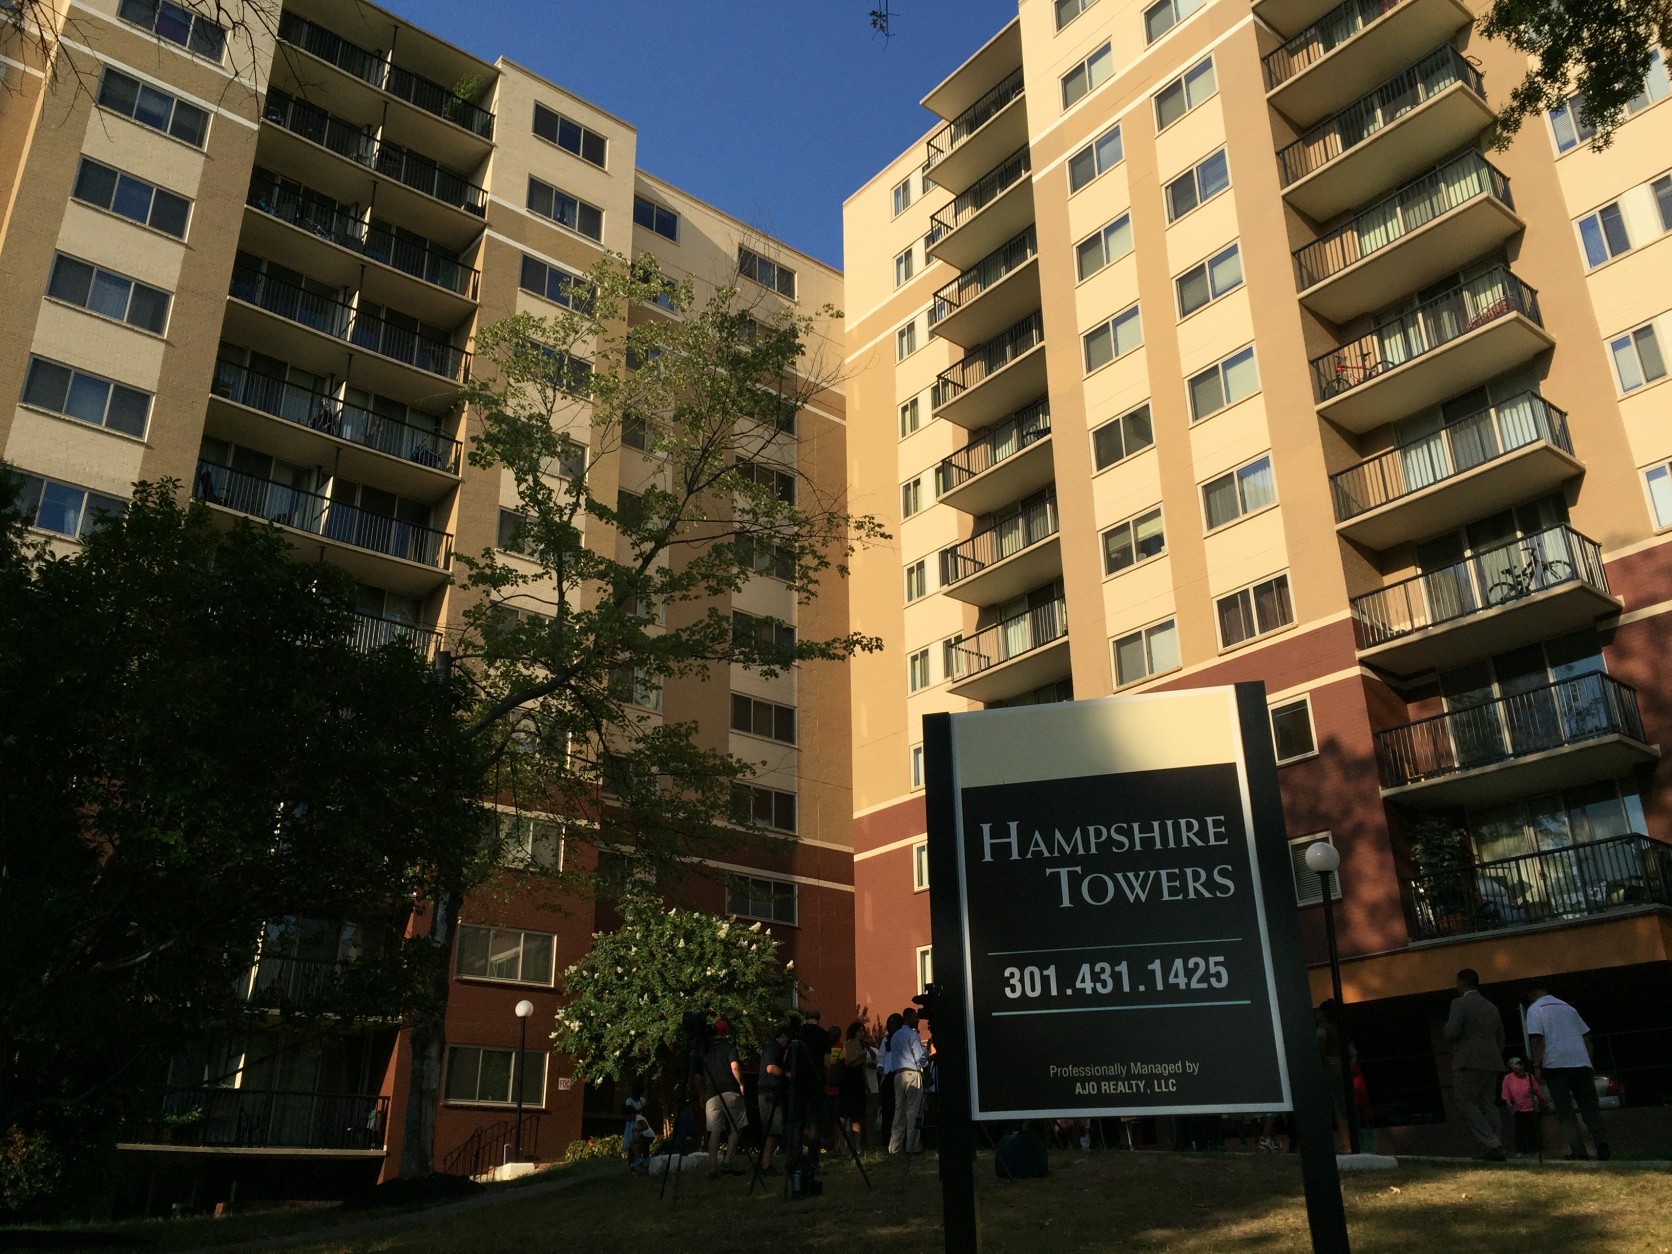 At Hampshire Tower Apartments in Takoma Park, rents are suddenly going up by as much as 70 percent, and many tenants say they'll be forced to move out. (WTOP/Michelle Basch)